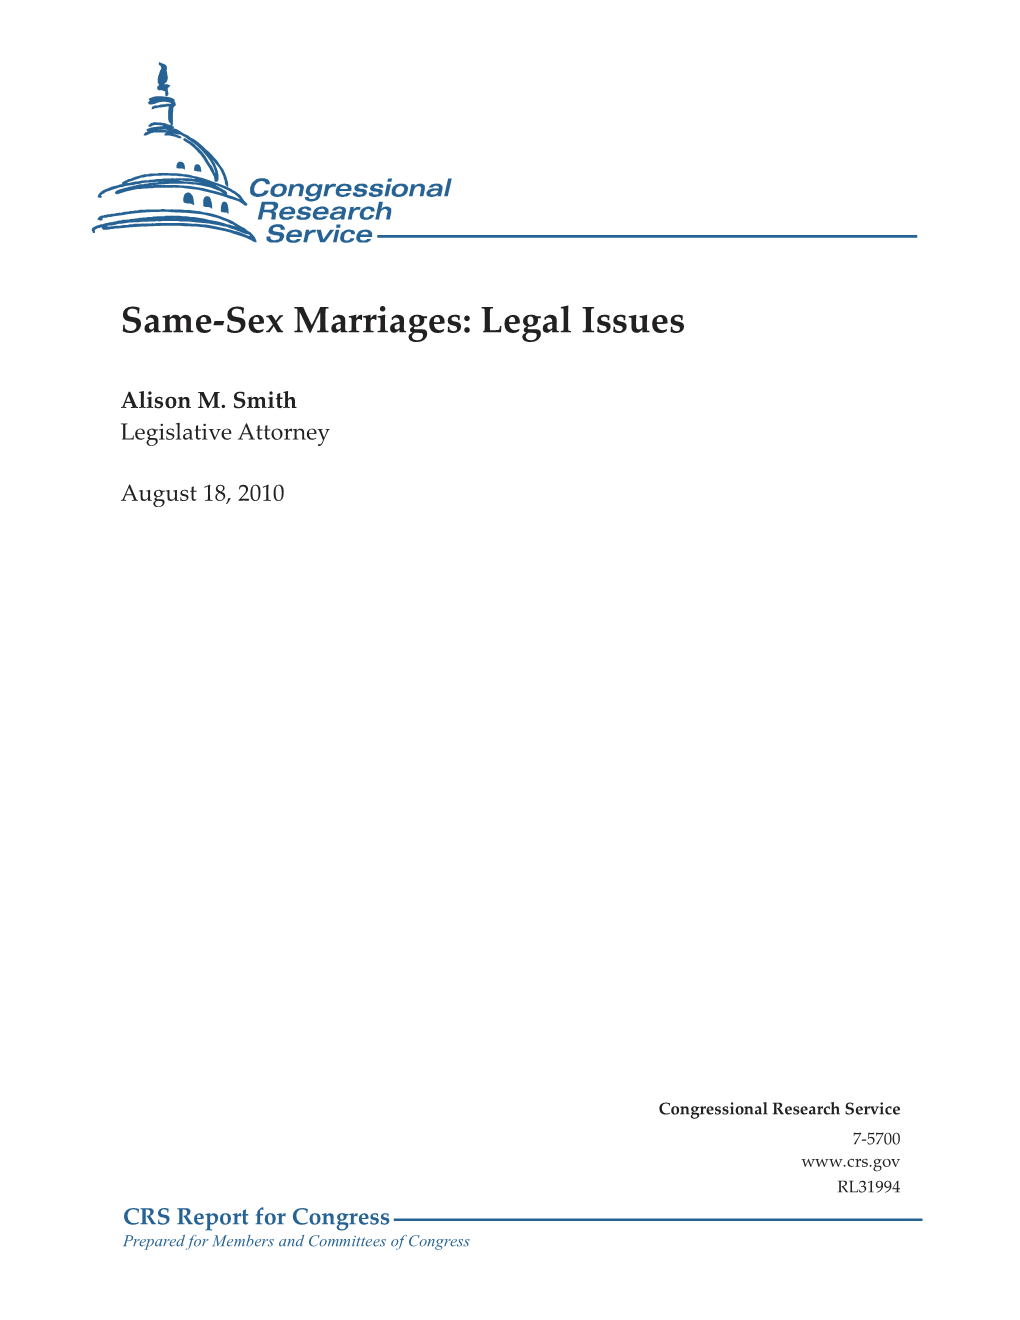 Same-Sex Marriages: Legal Issues